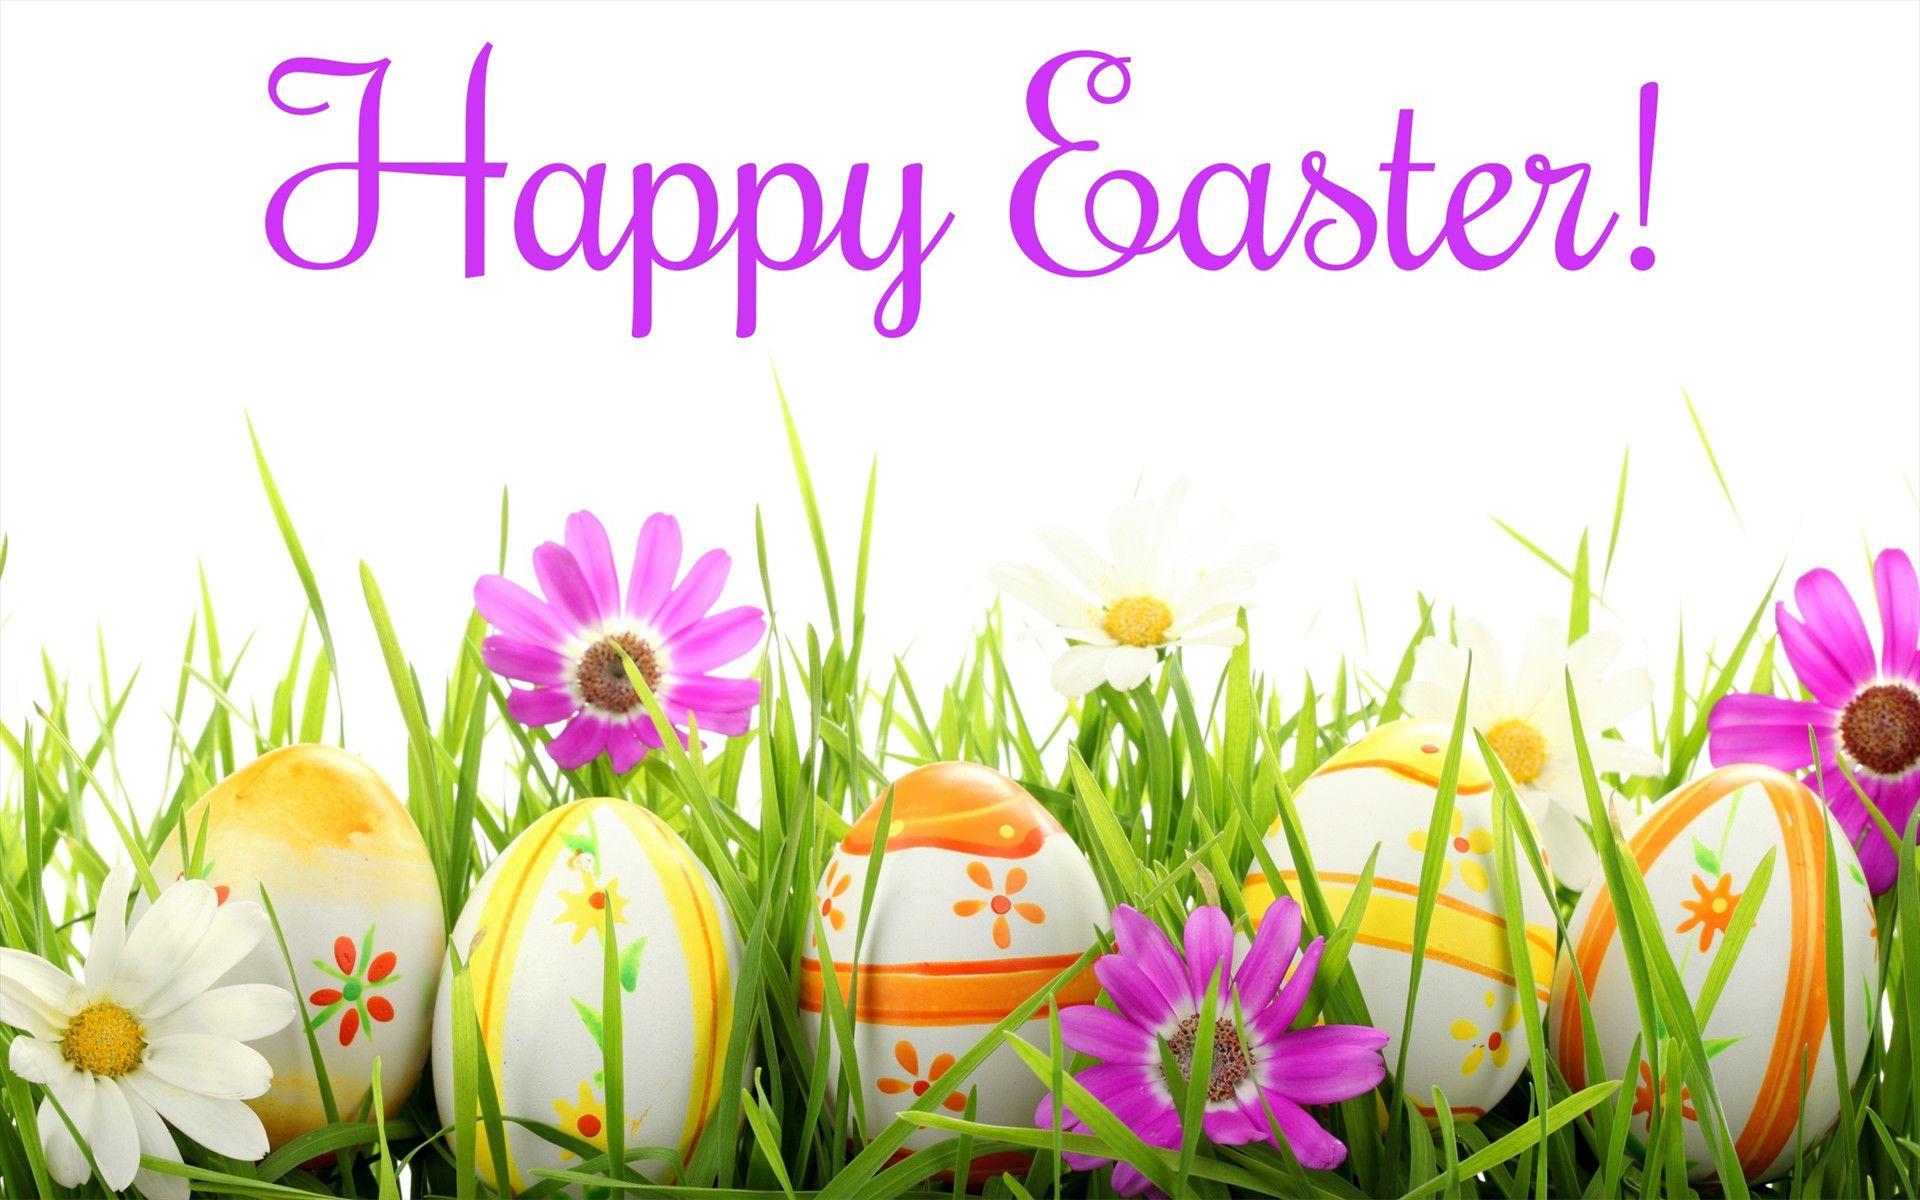 CATCH THE BUZZ – Happy Easter!